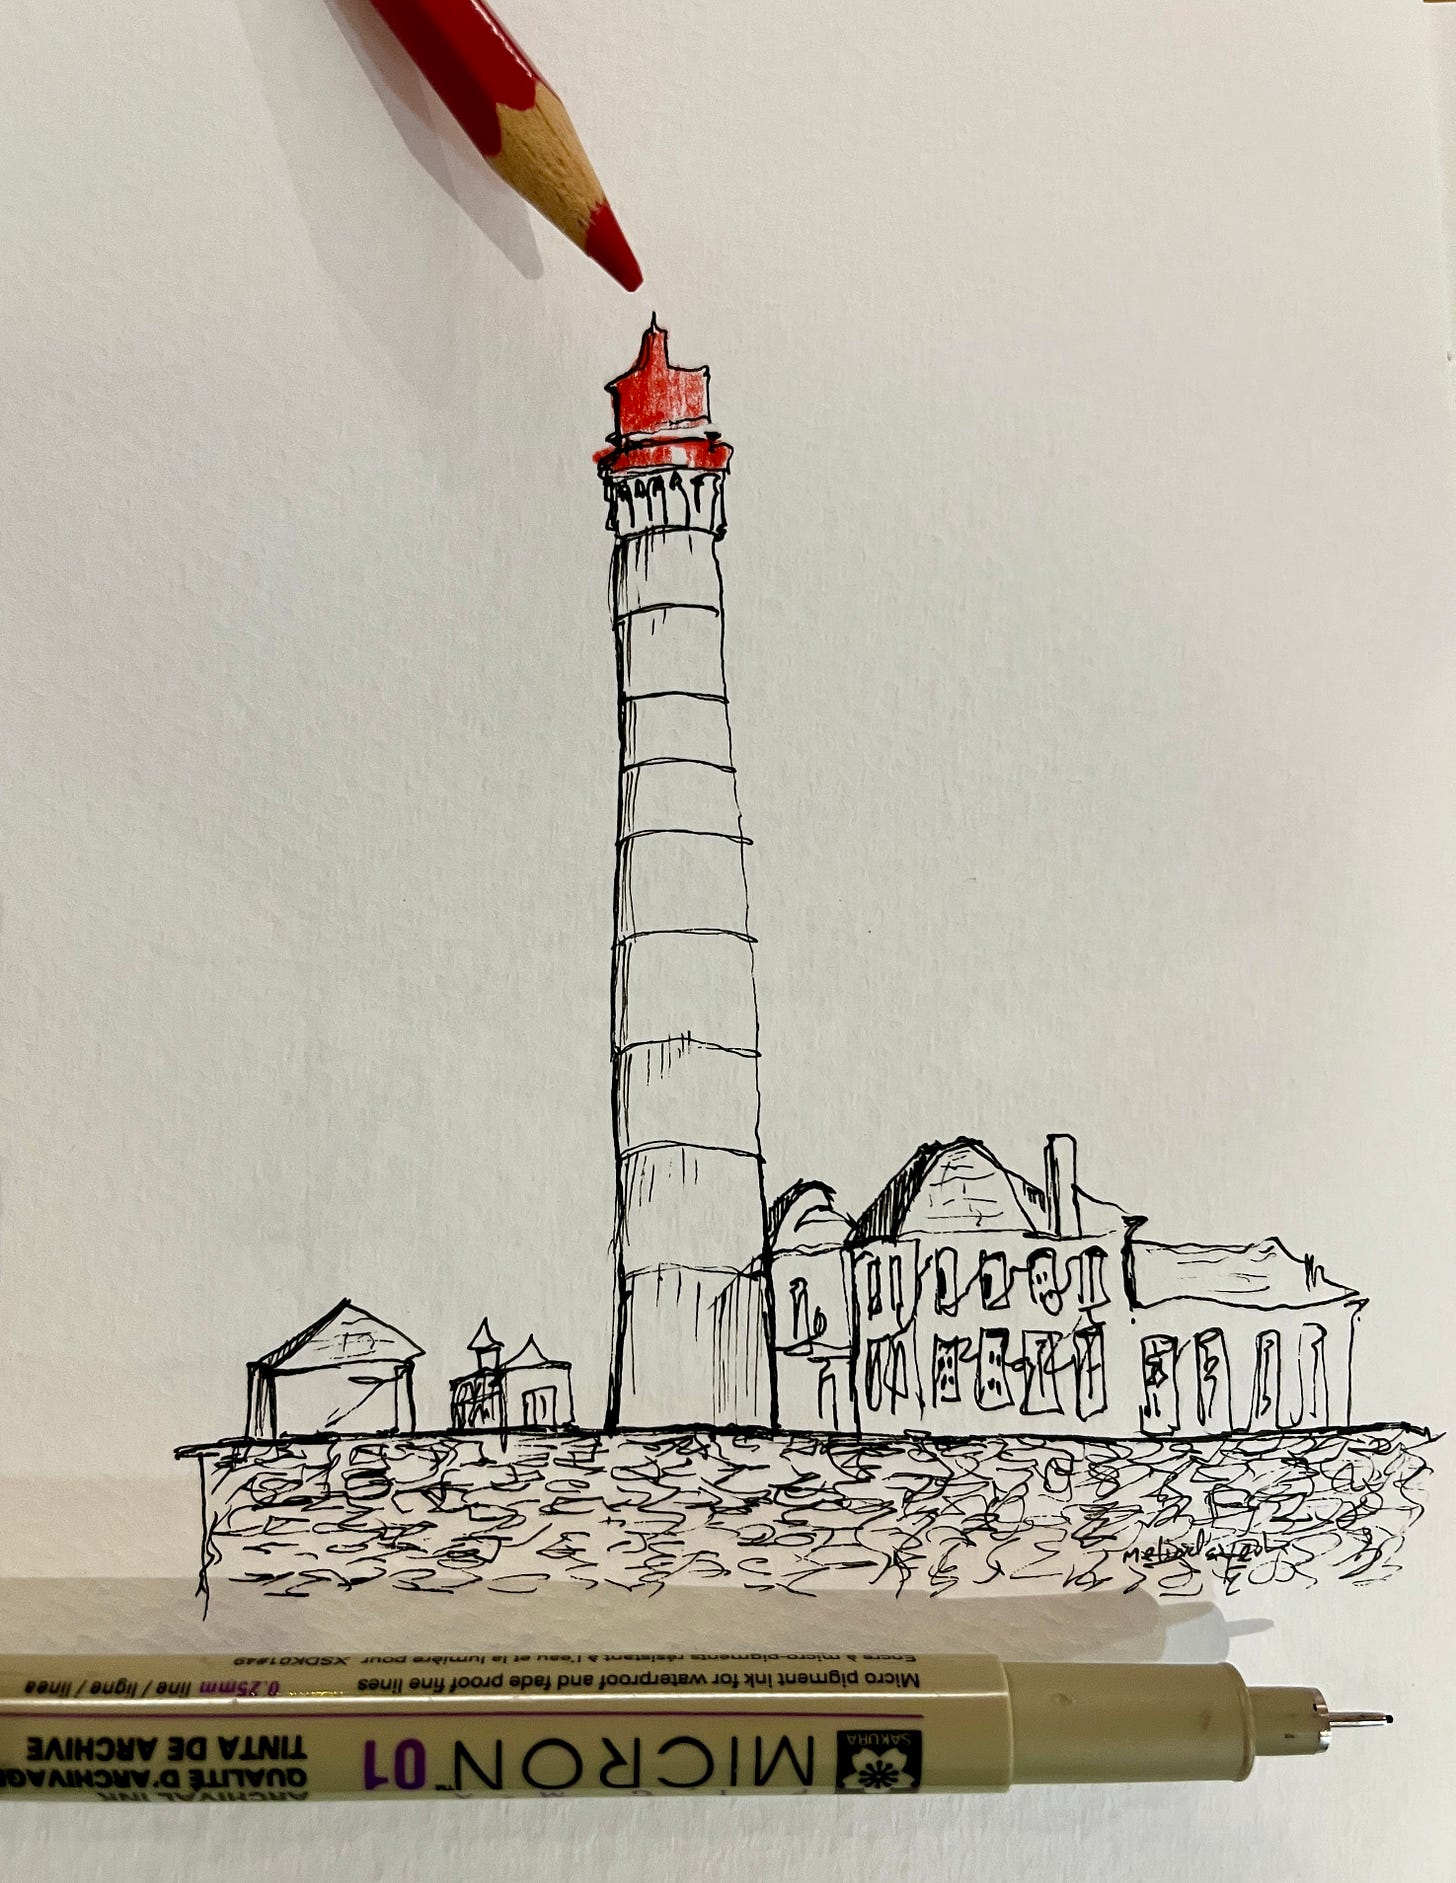 image: fine liner black pen sketch with red colour pencil for the top of the lighthouse, with buildings at the bottom